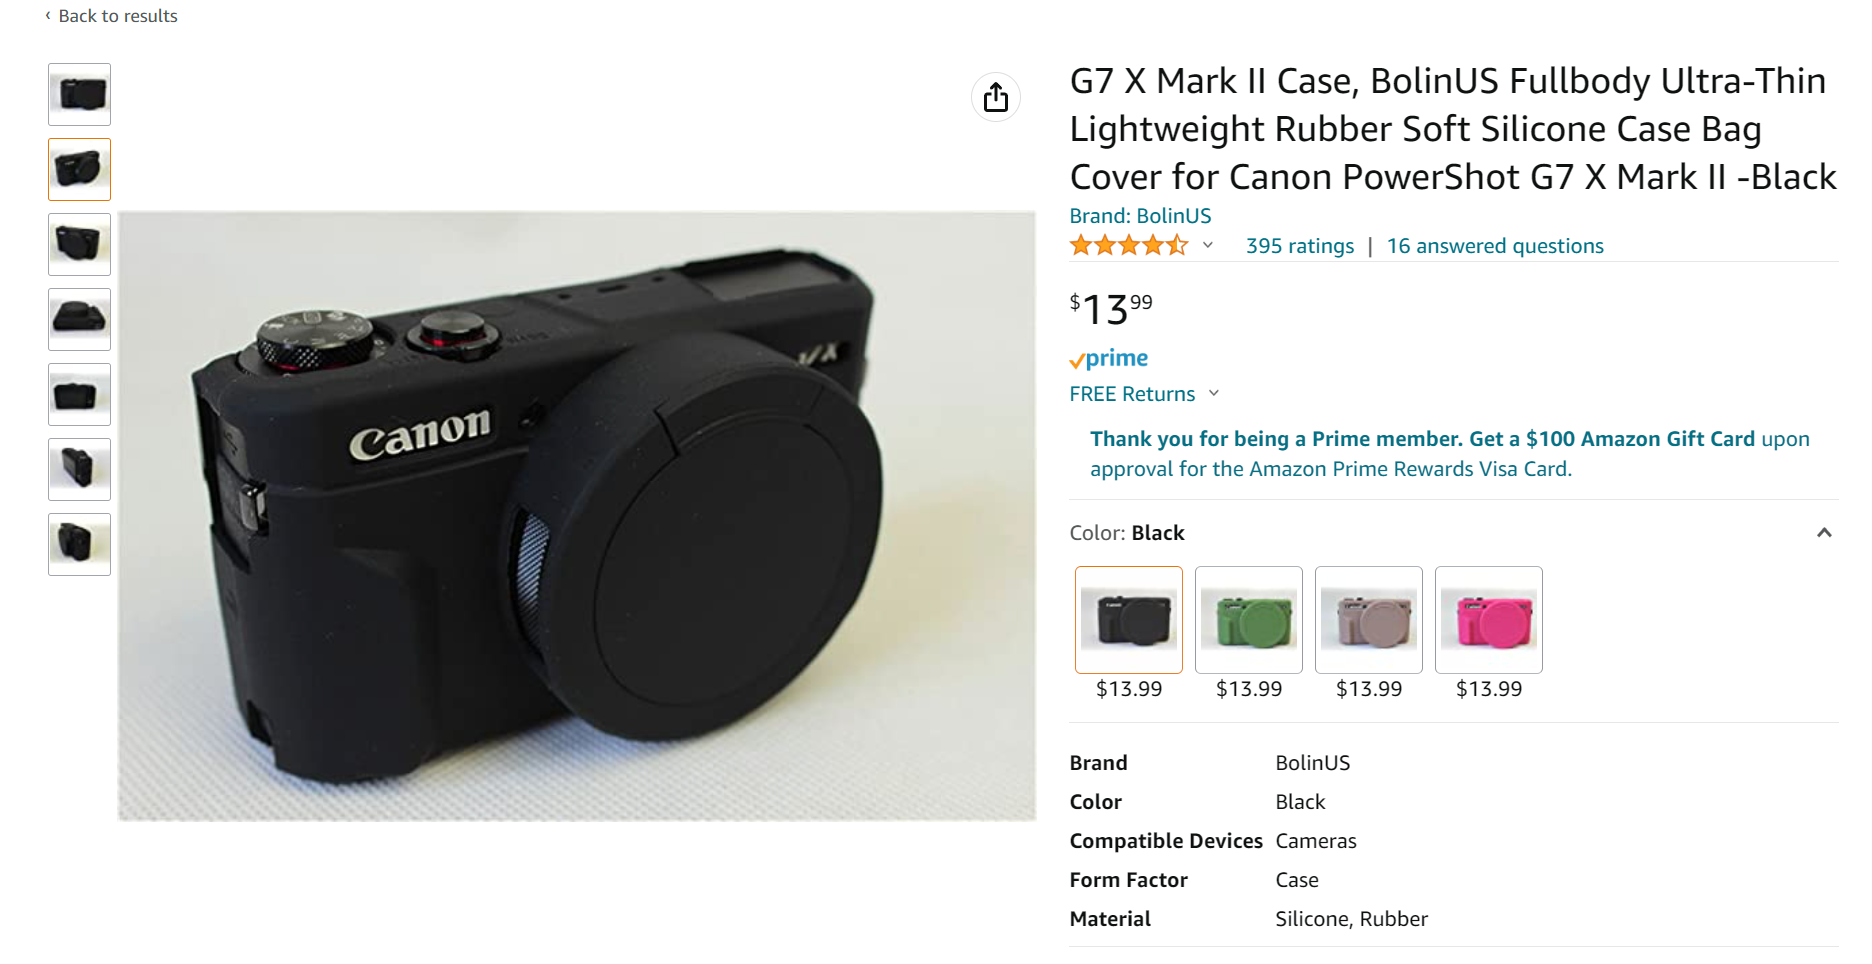  G7X Mark II Case G7X Mark III Case G7X Camera Silicone Case  Ultra-Thin Lightweight Rubber Soft Silicone Case Bag Cover for Canon  PowerShot G7X G7X Mark II G7X Mark III+